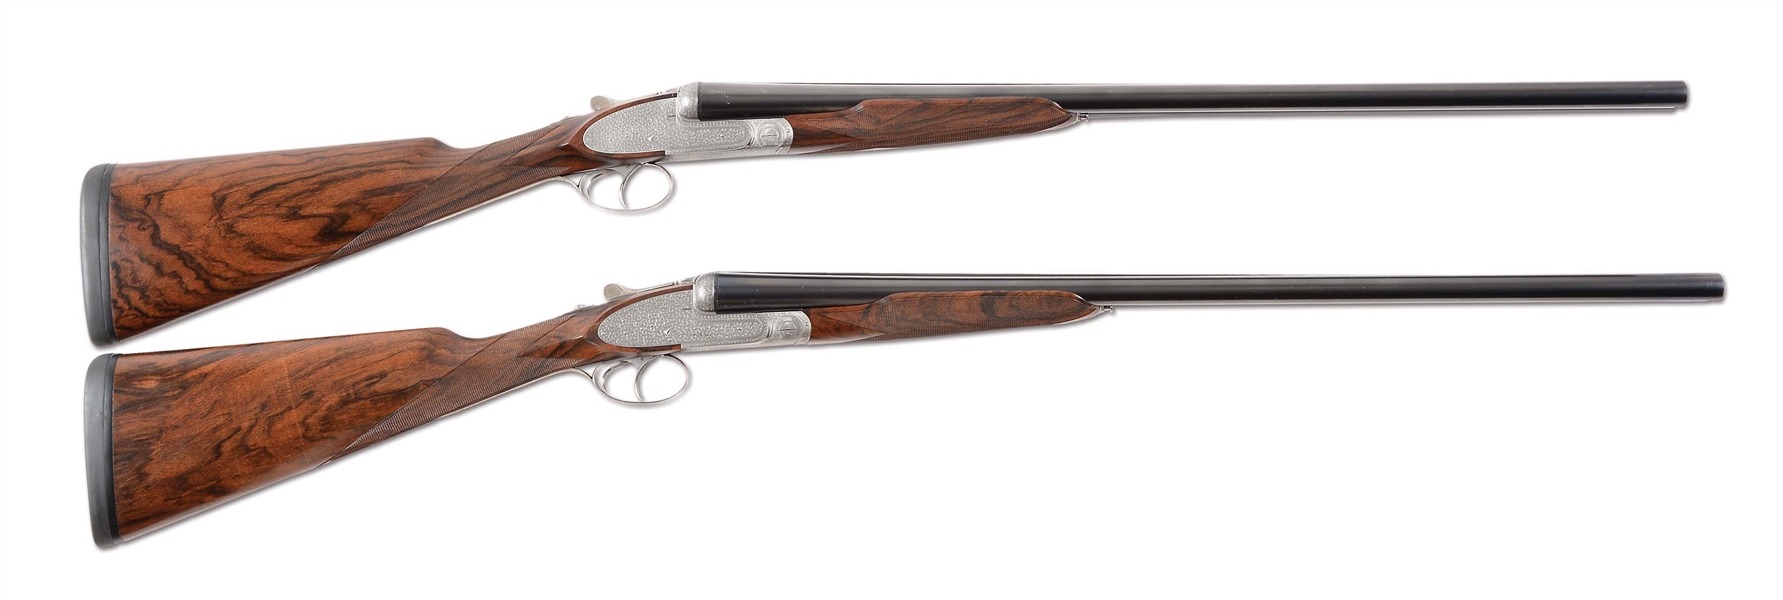 (M) THE FINALE OF "SET FOR LIFE" A PAIR OF PIOTTI KING 1 12 BORE SIDELOCK EJECTOR GAME GUNS.  